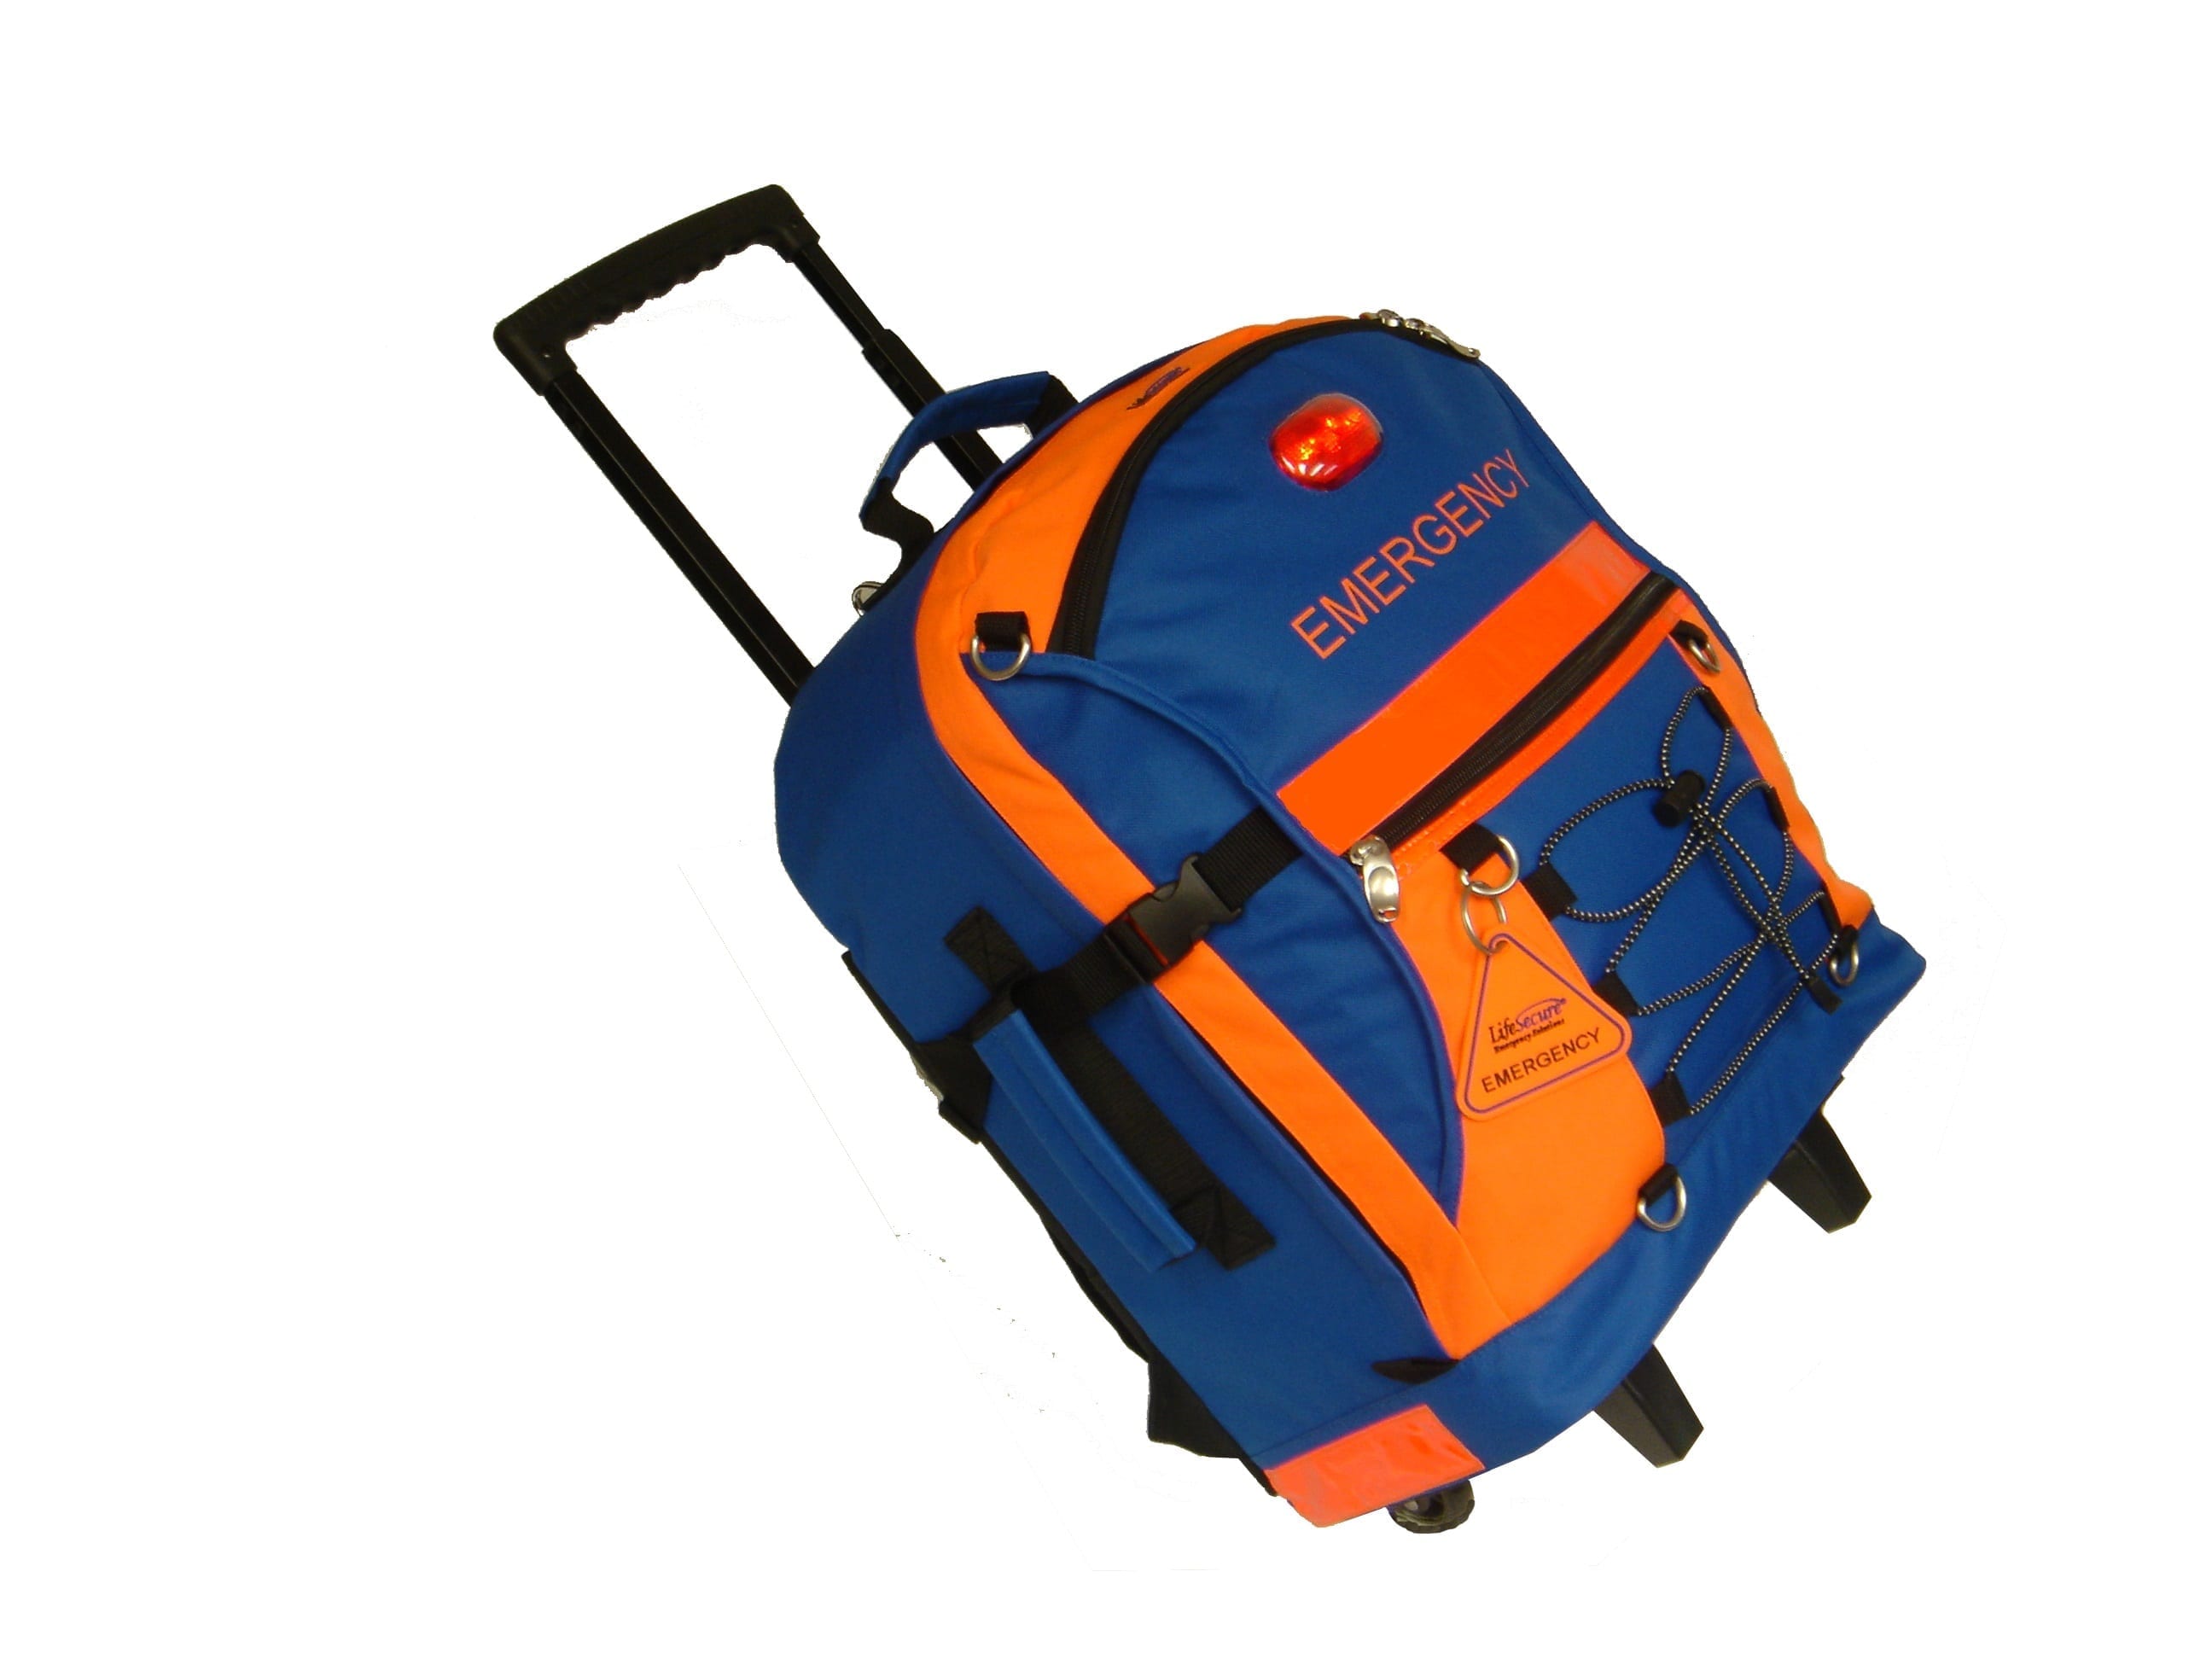 [Load-Your-Own] SECUR-Evac Hi-Visibility/Hi-Safety Easy-Roll ALL-HAZARDS Emergency Backpack - XL-Capacity